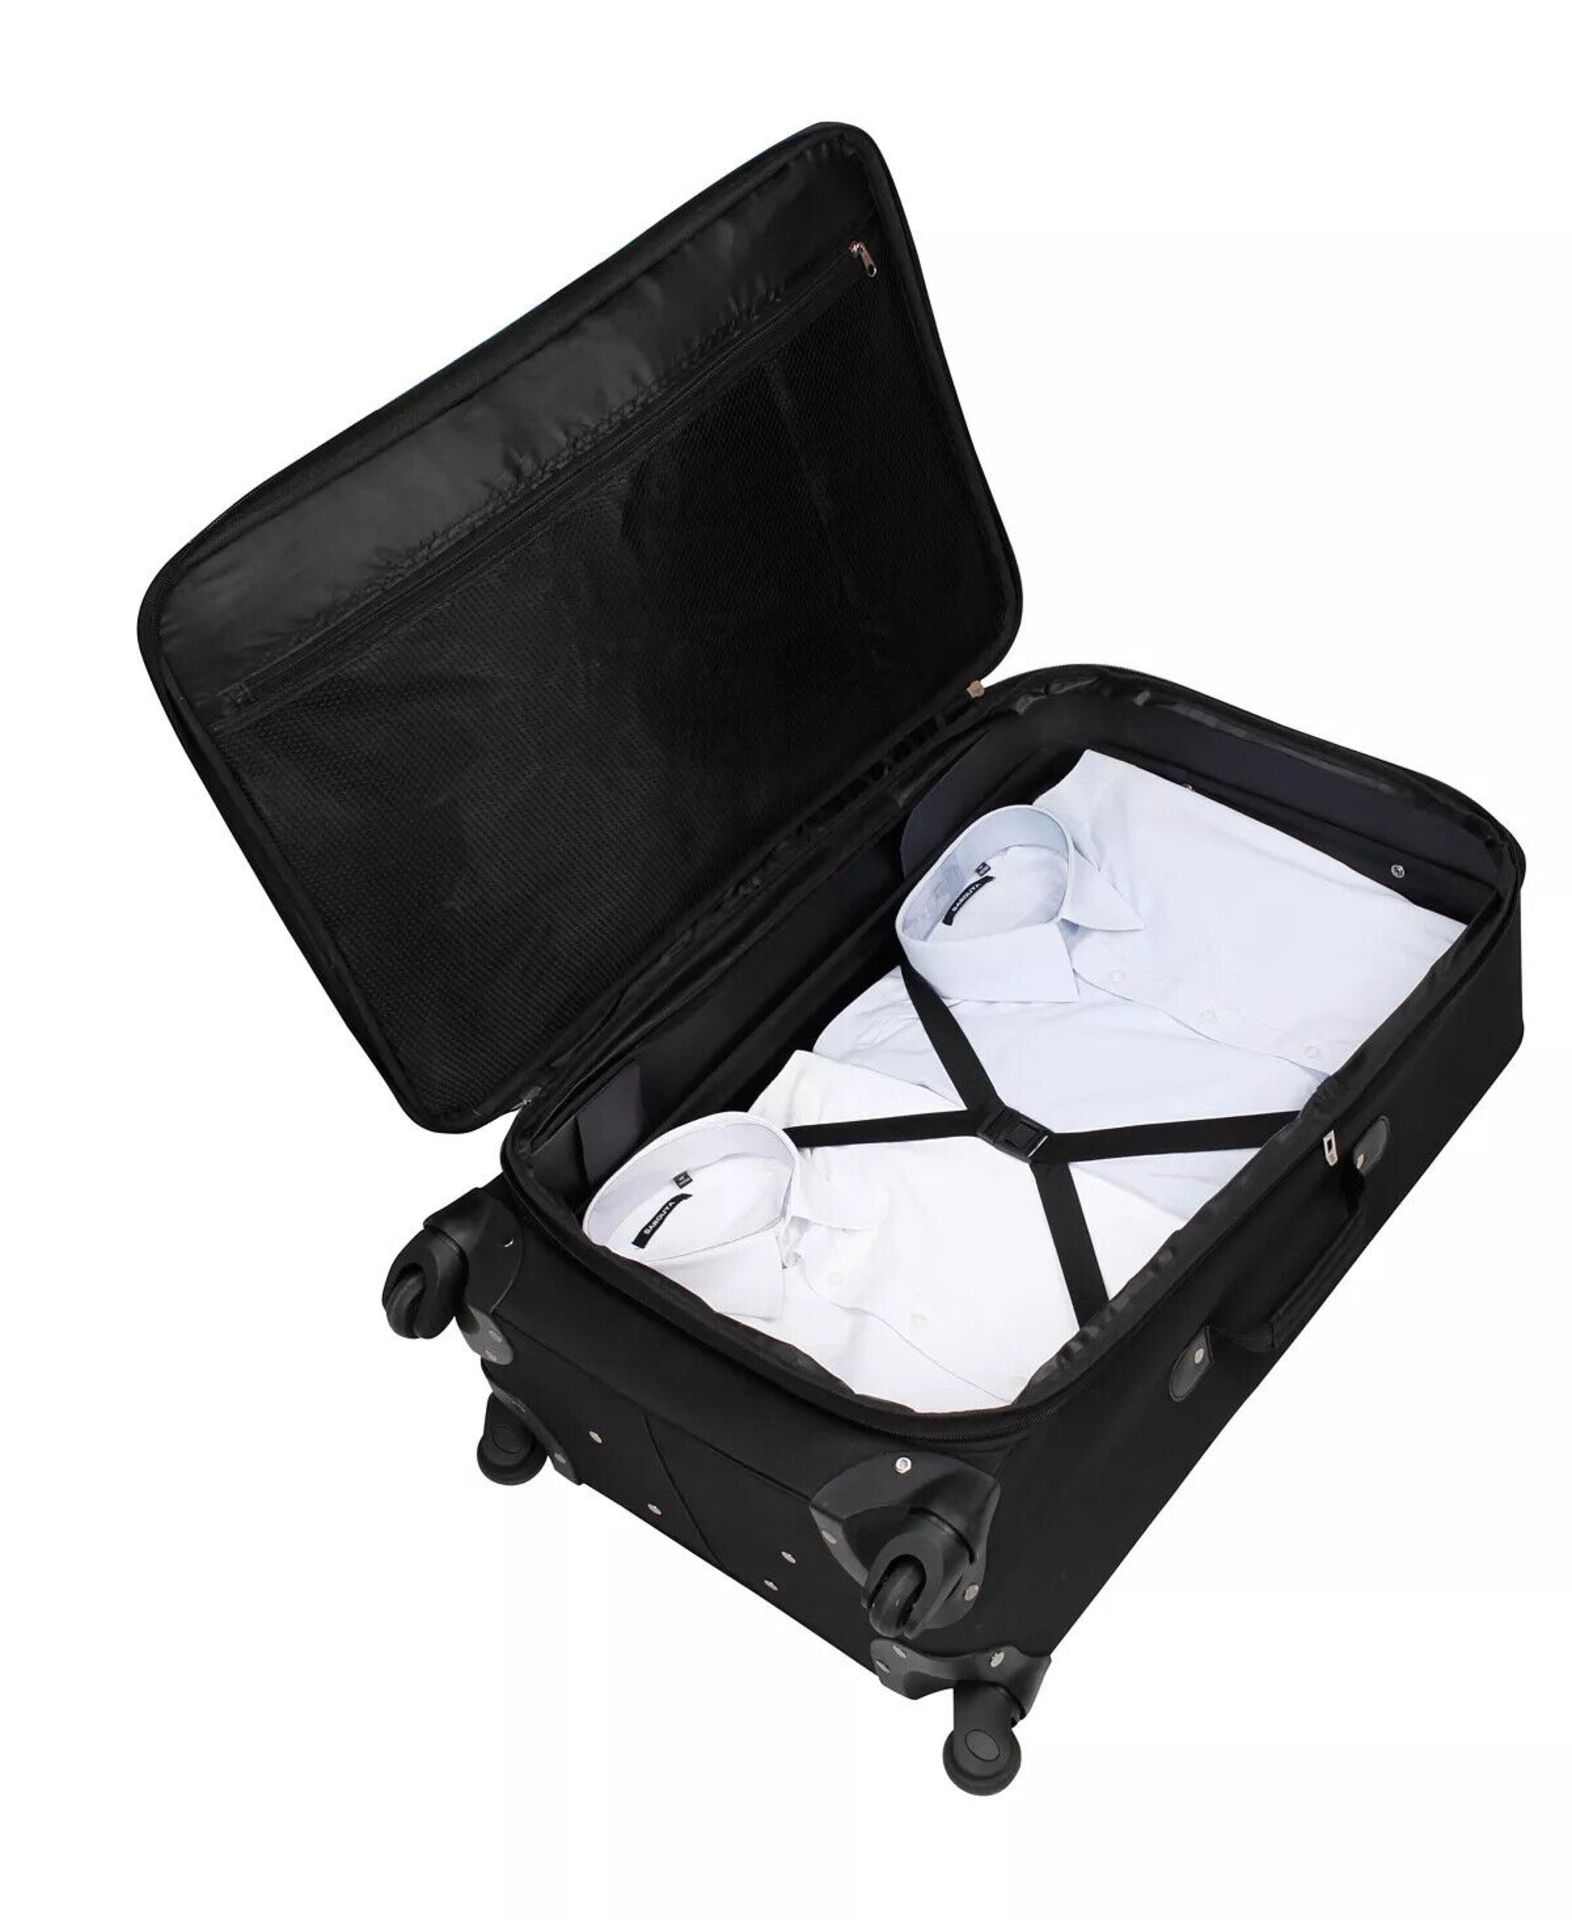 PALLET CONTANING 10 SETS OF 5 PC GENUINE TAG RIDGEFIELD SOFTSIDE LIGHTWEIGHT LUGGAGE SET - Image 8 of 10